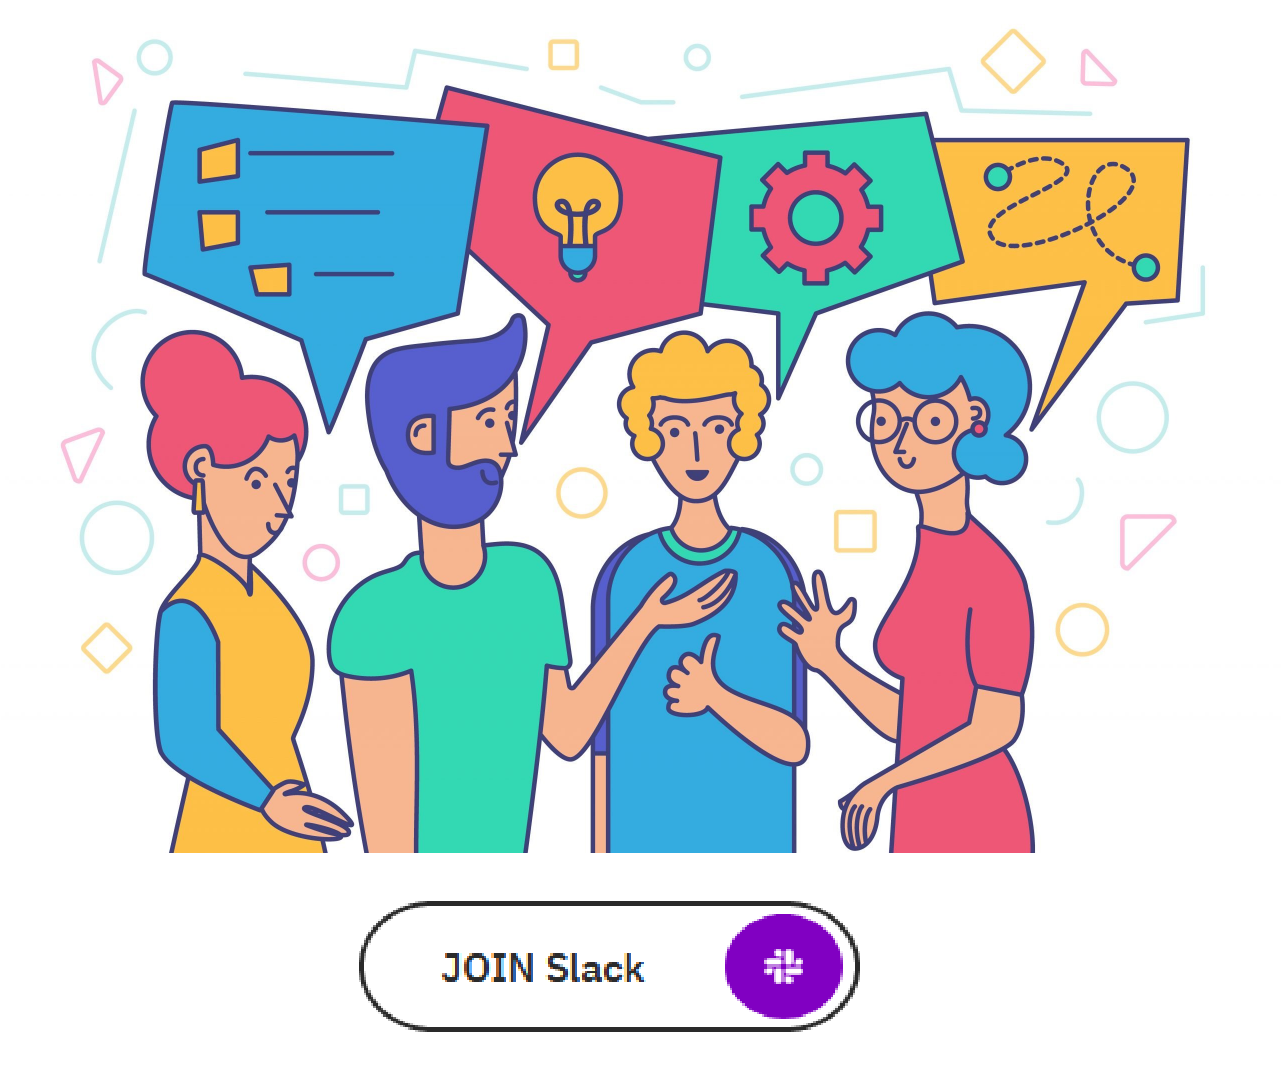 _img/0-welcome/joinslack.png